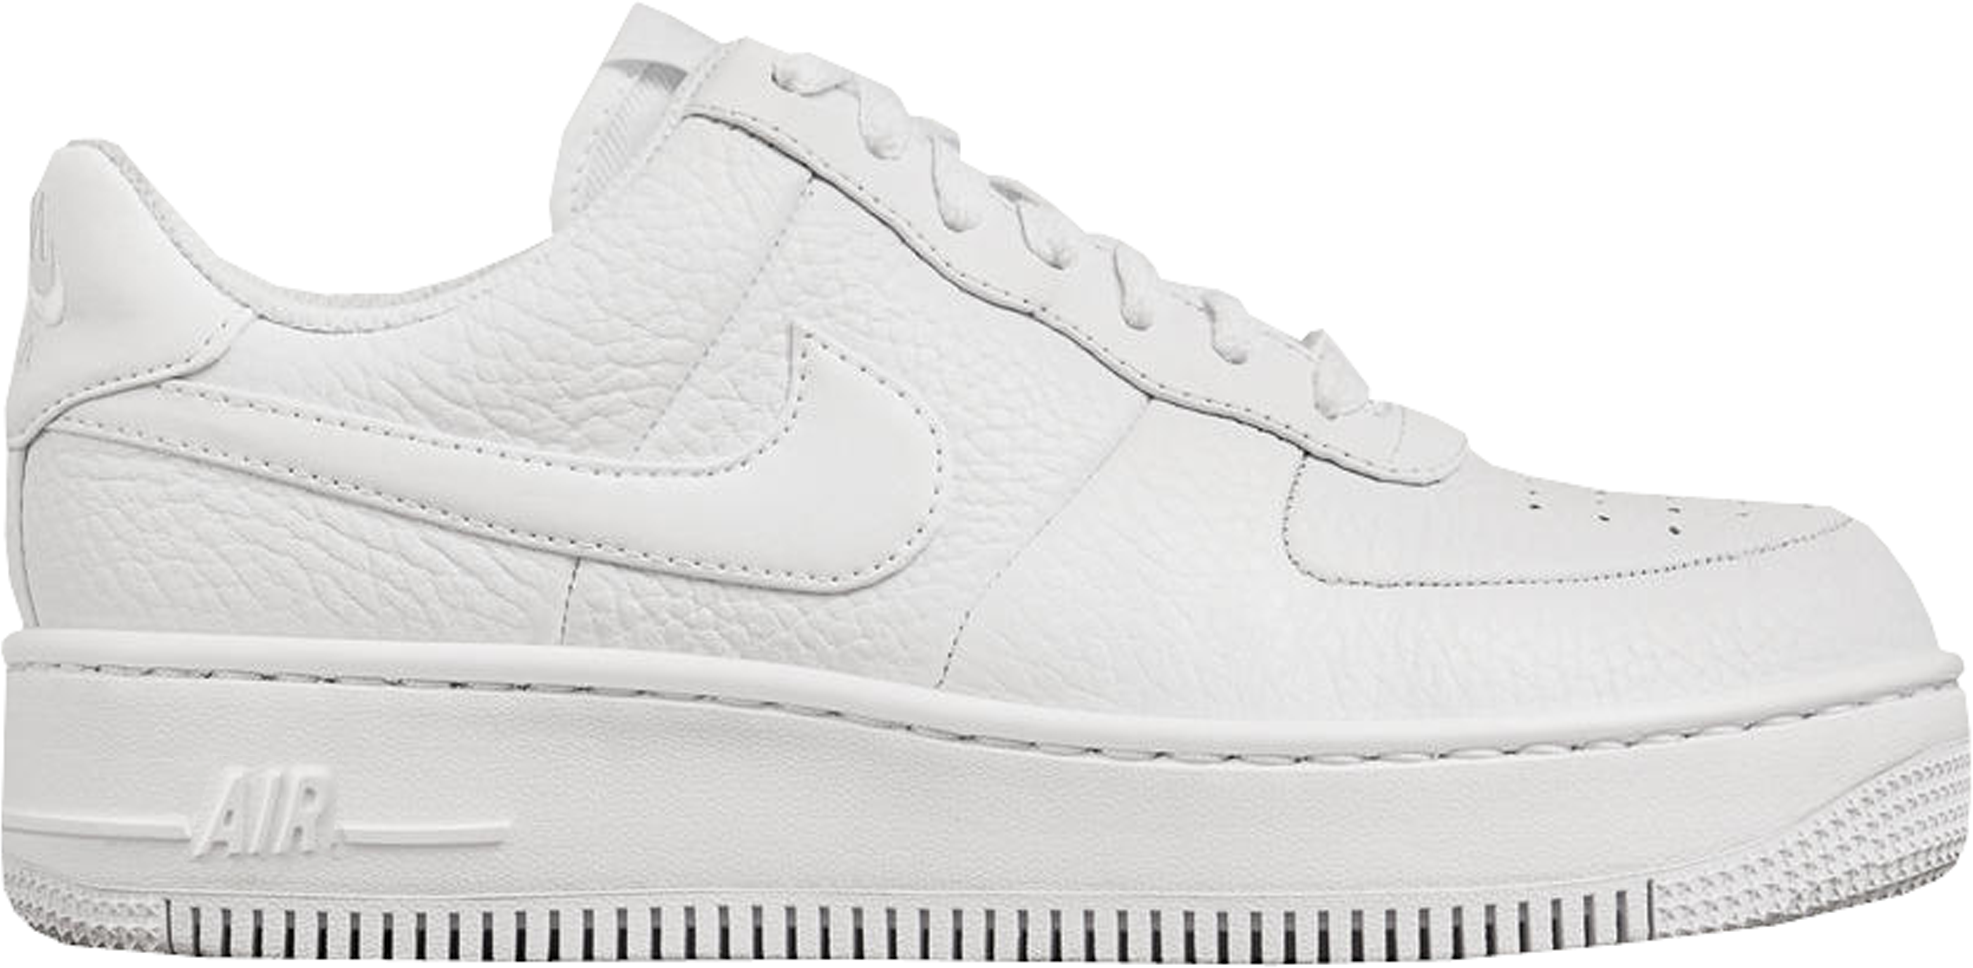 Nike Air Force 1 Upstep Low Bread & Butter White Women's